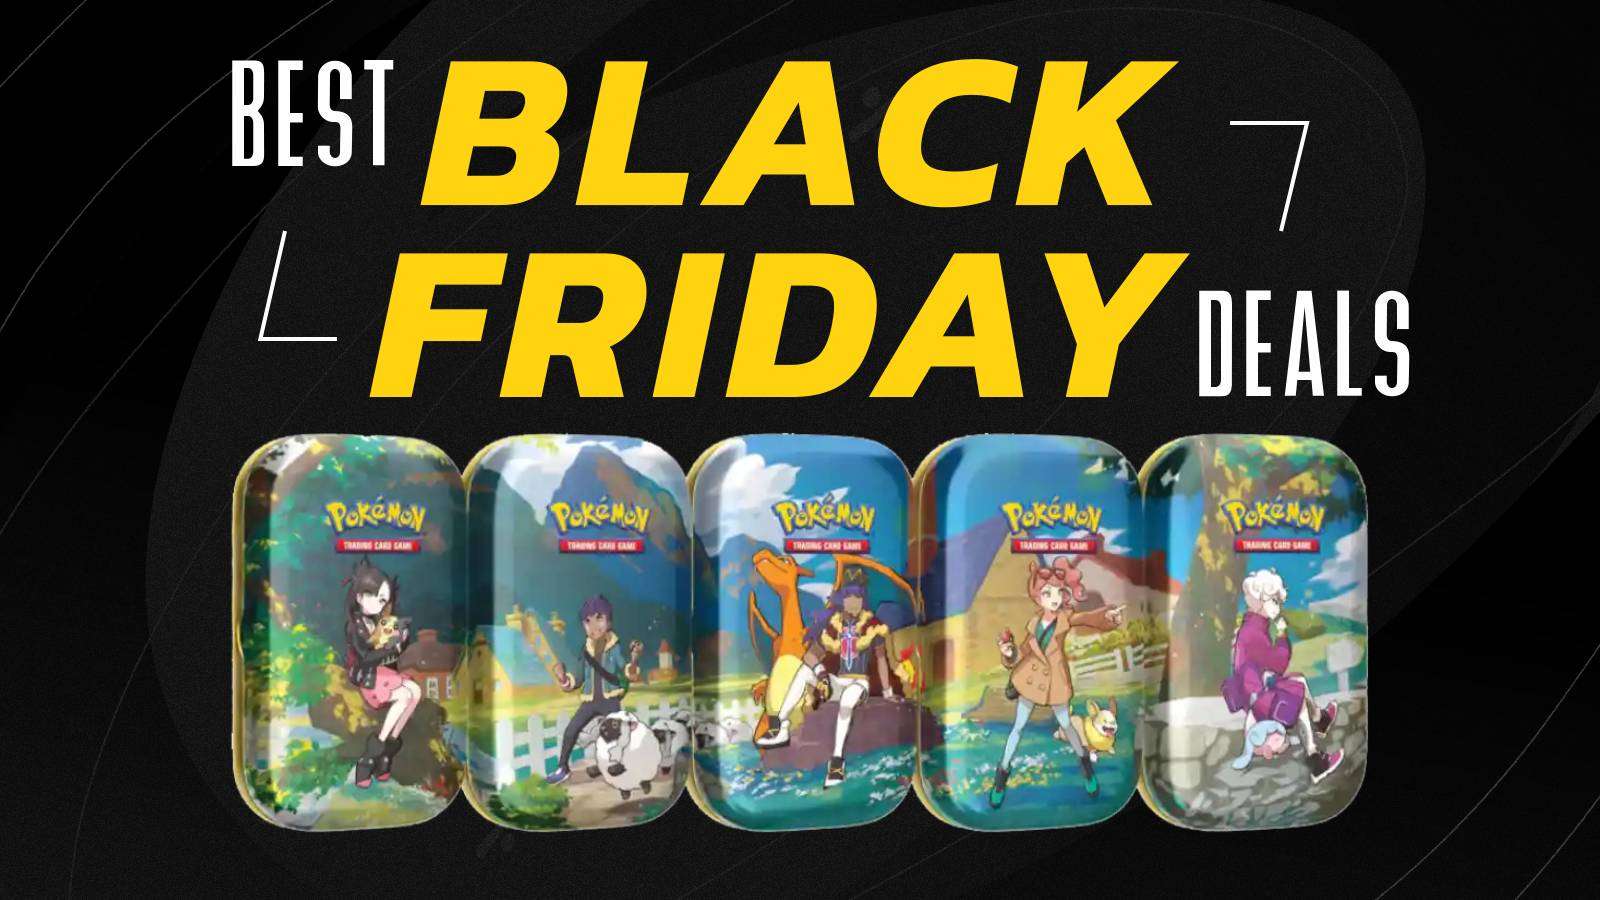 Pokemon TCG Crown Zenith Mini Tins are visible below text reading Best Black Friday Deals